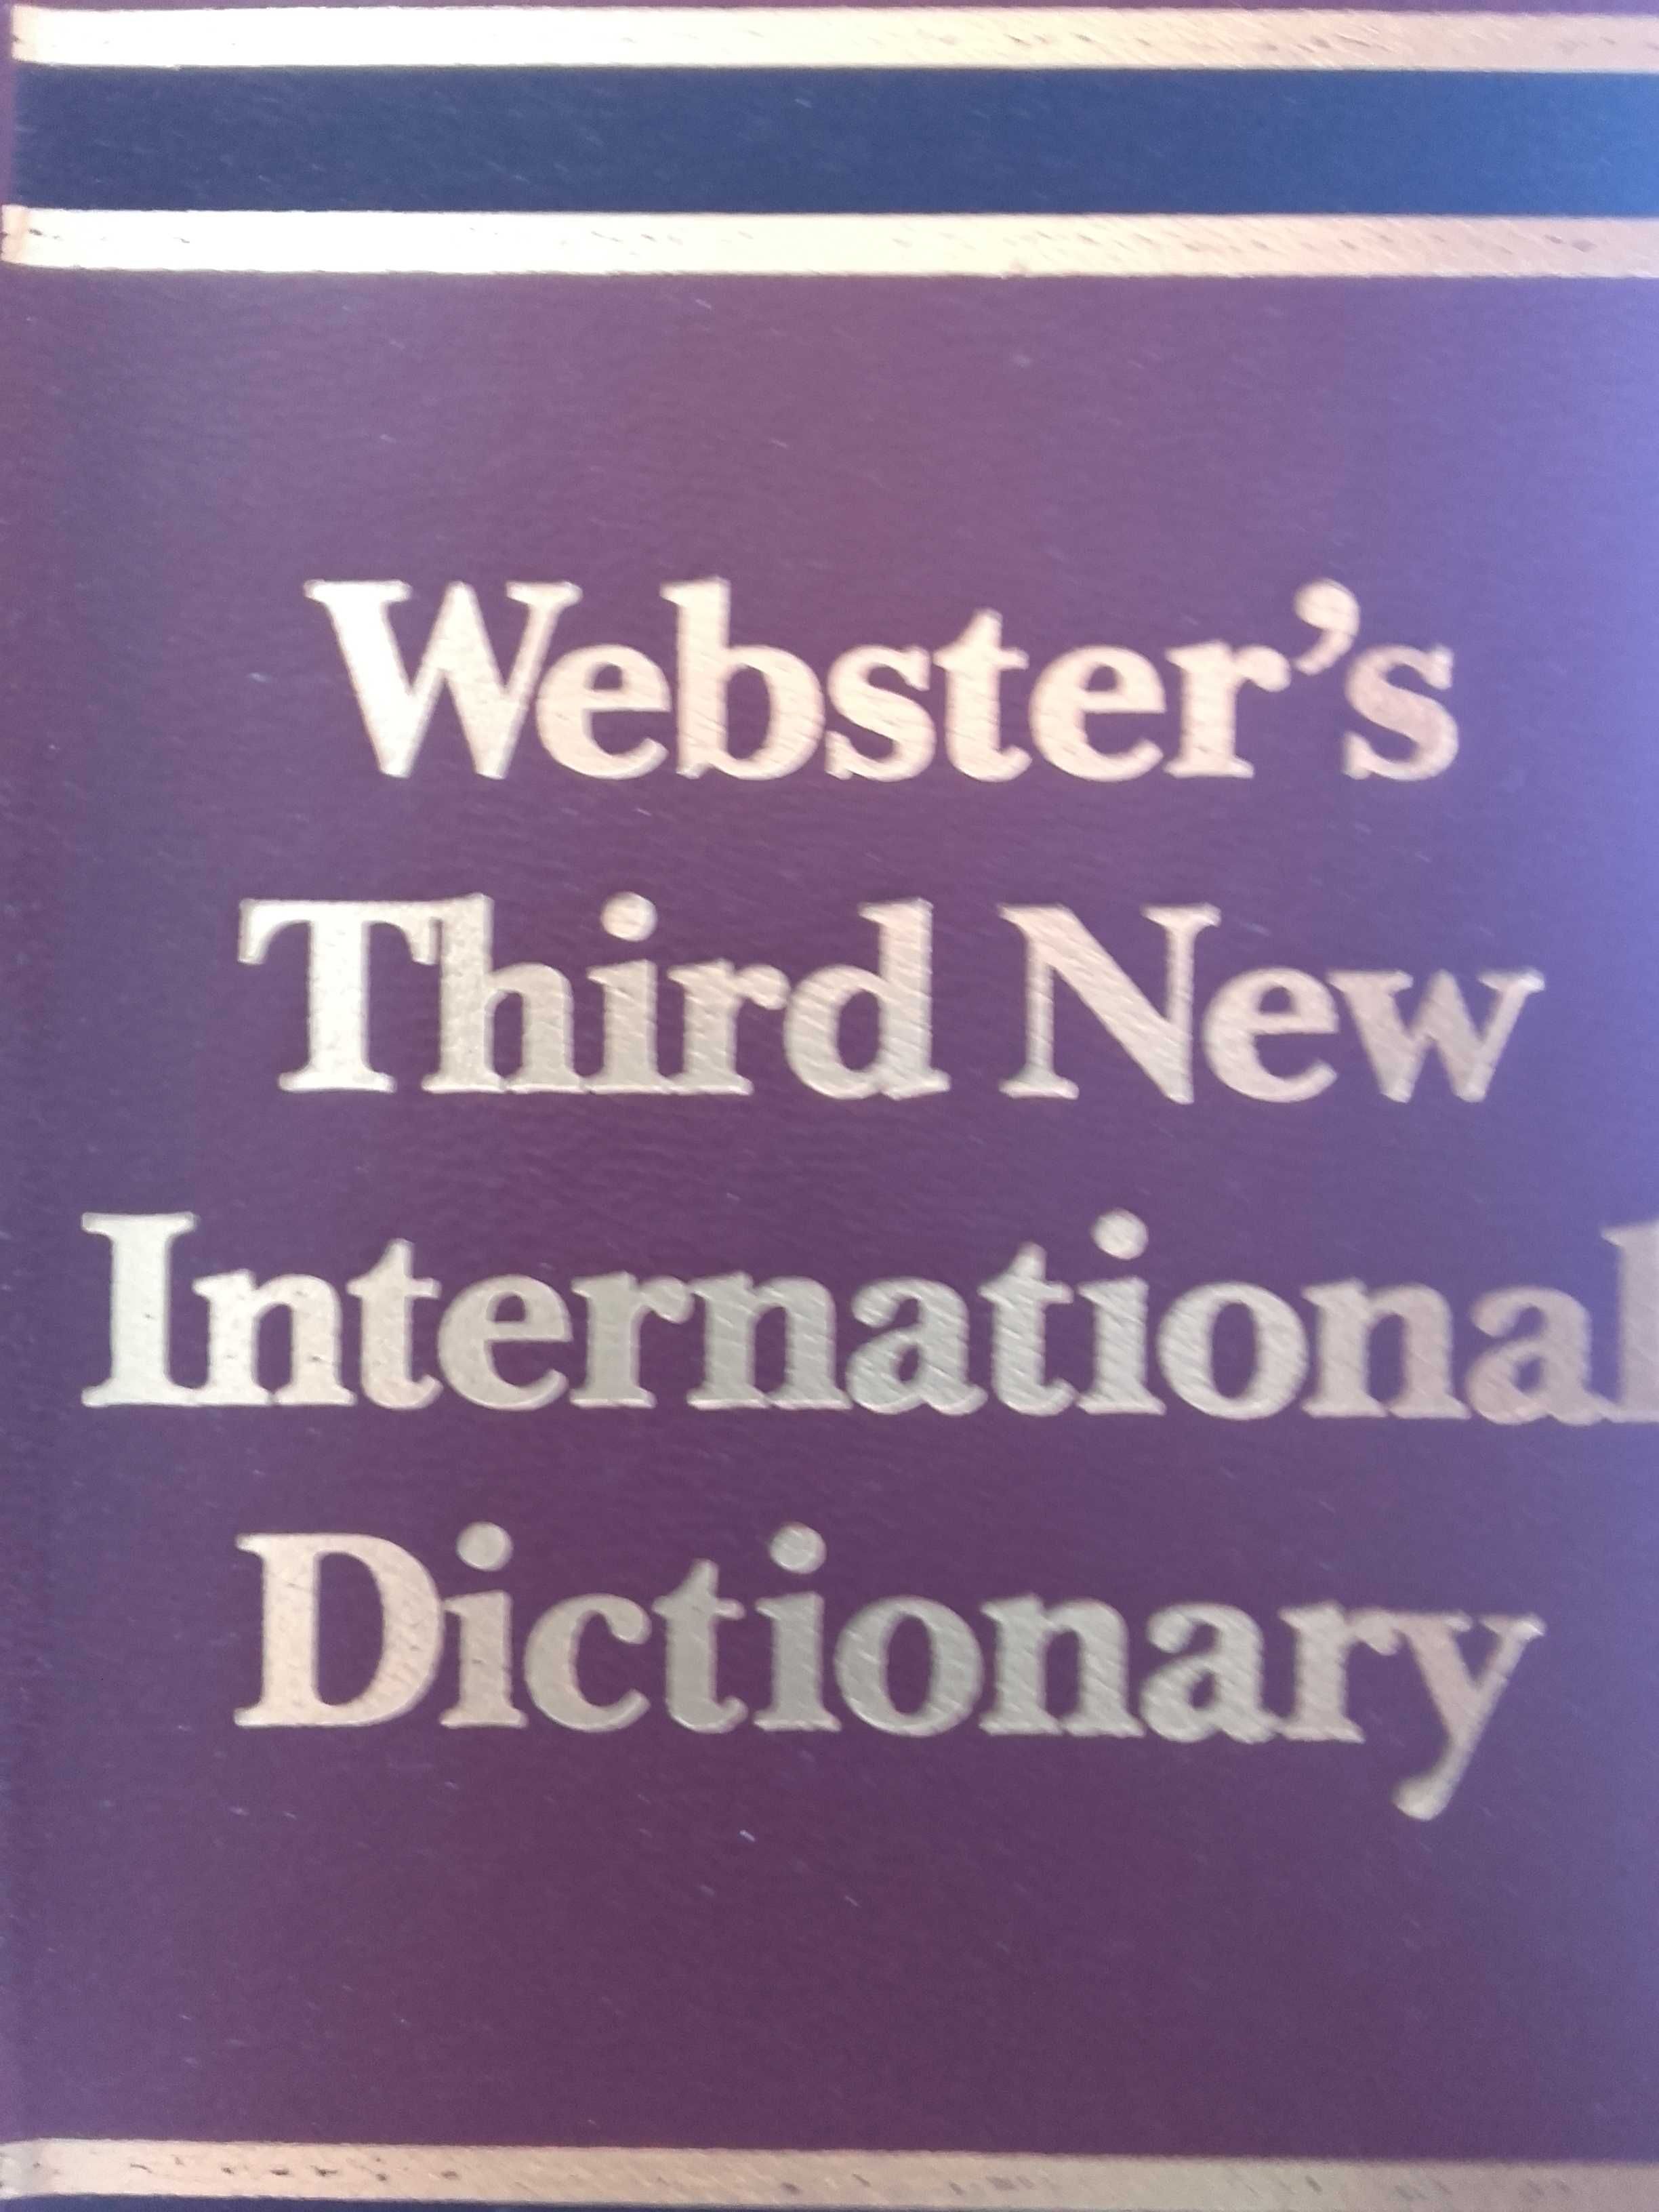 Websters third new international dictionary